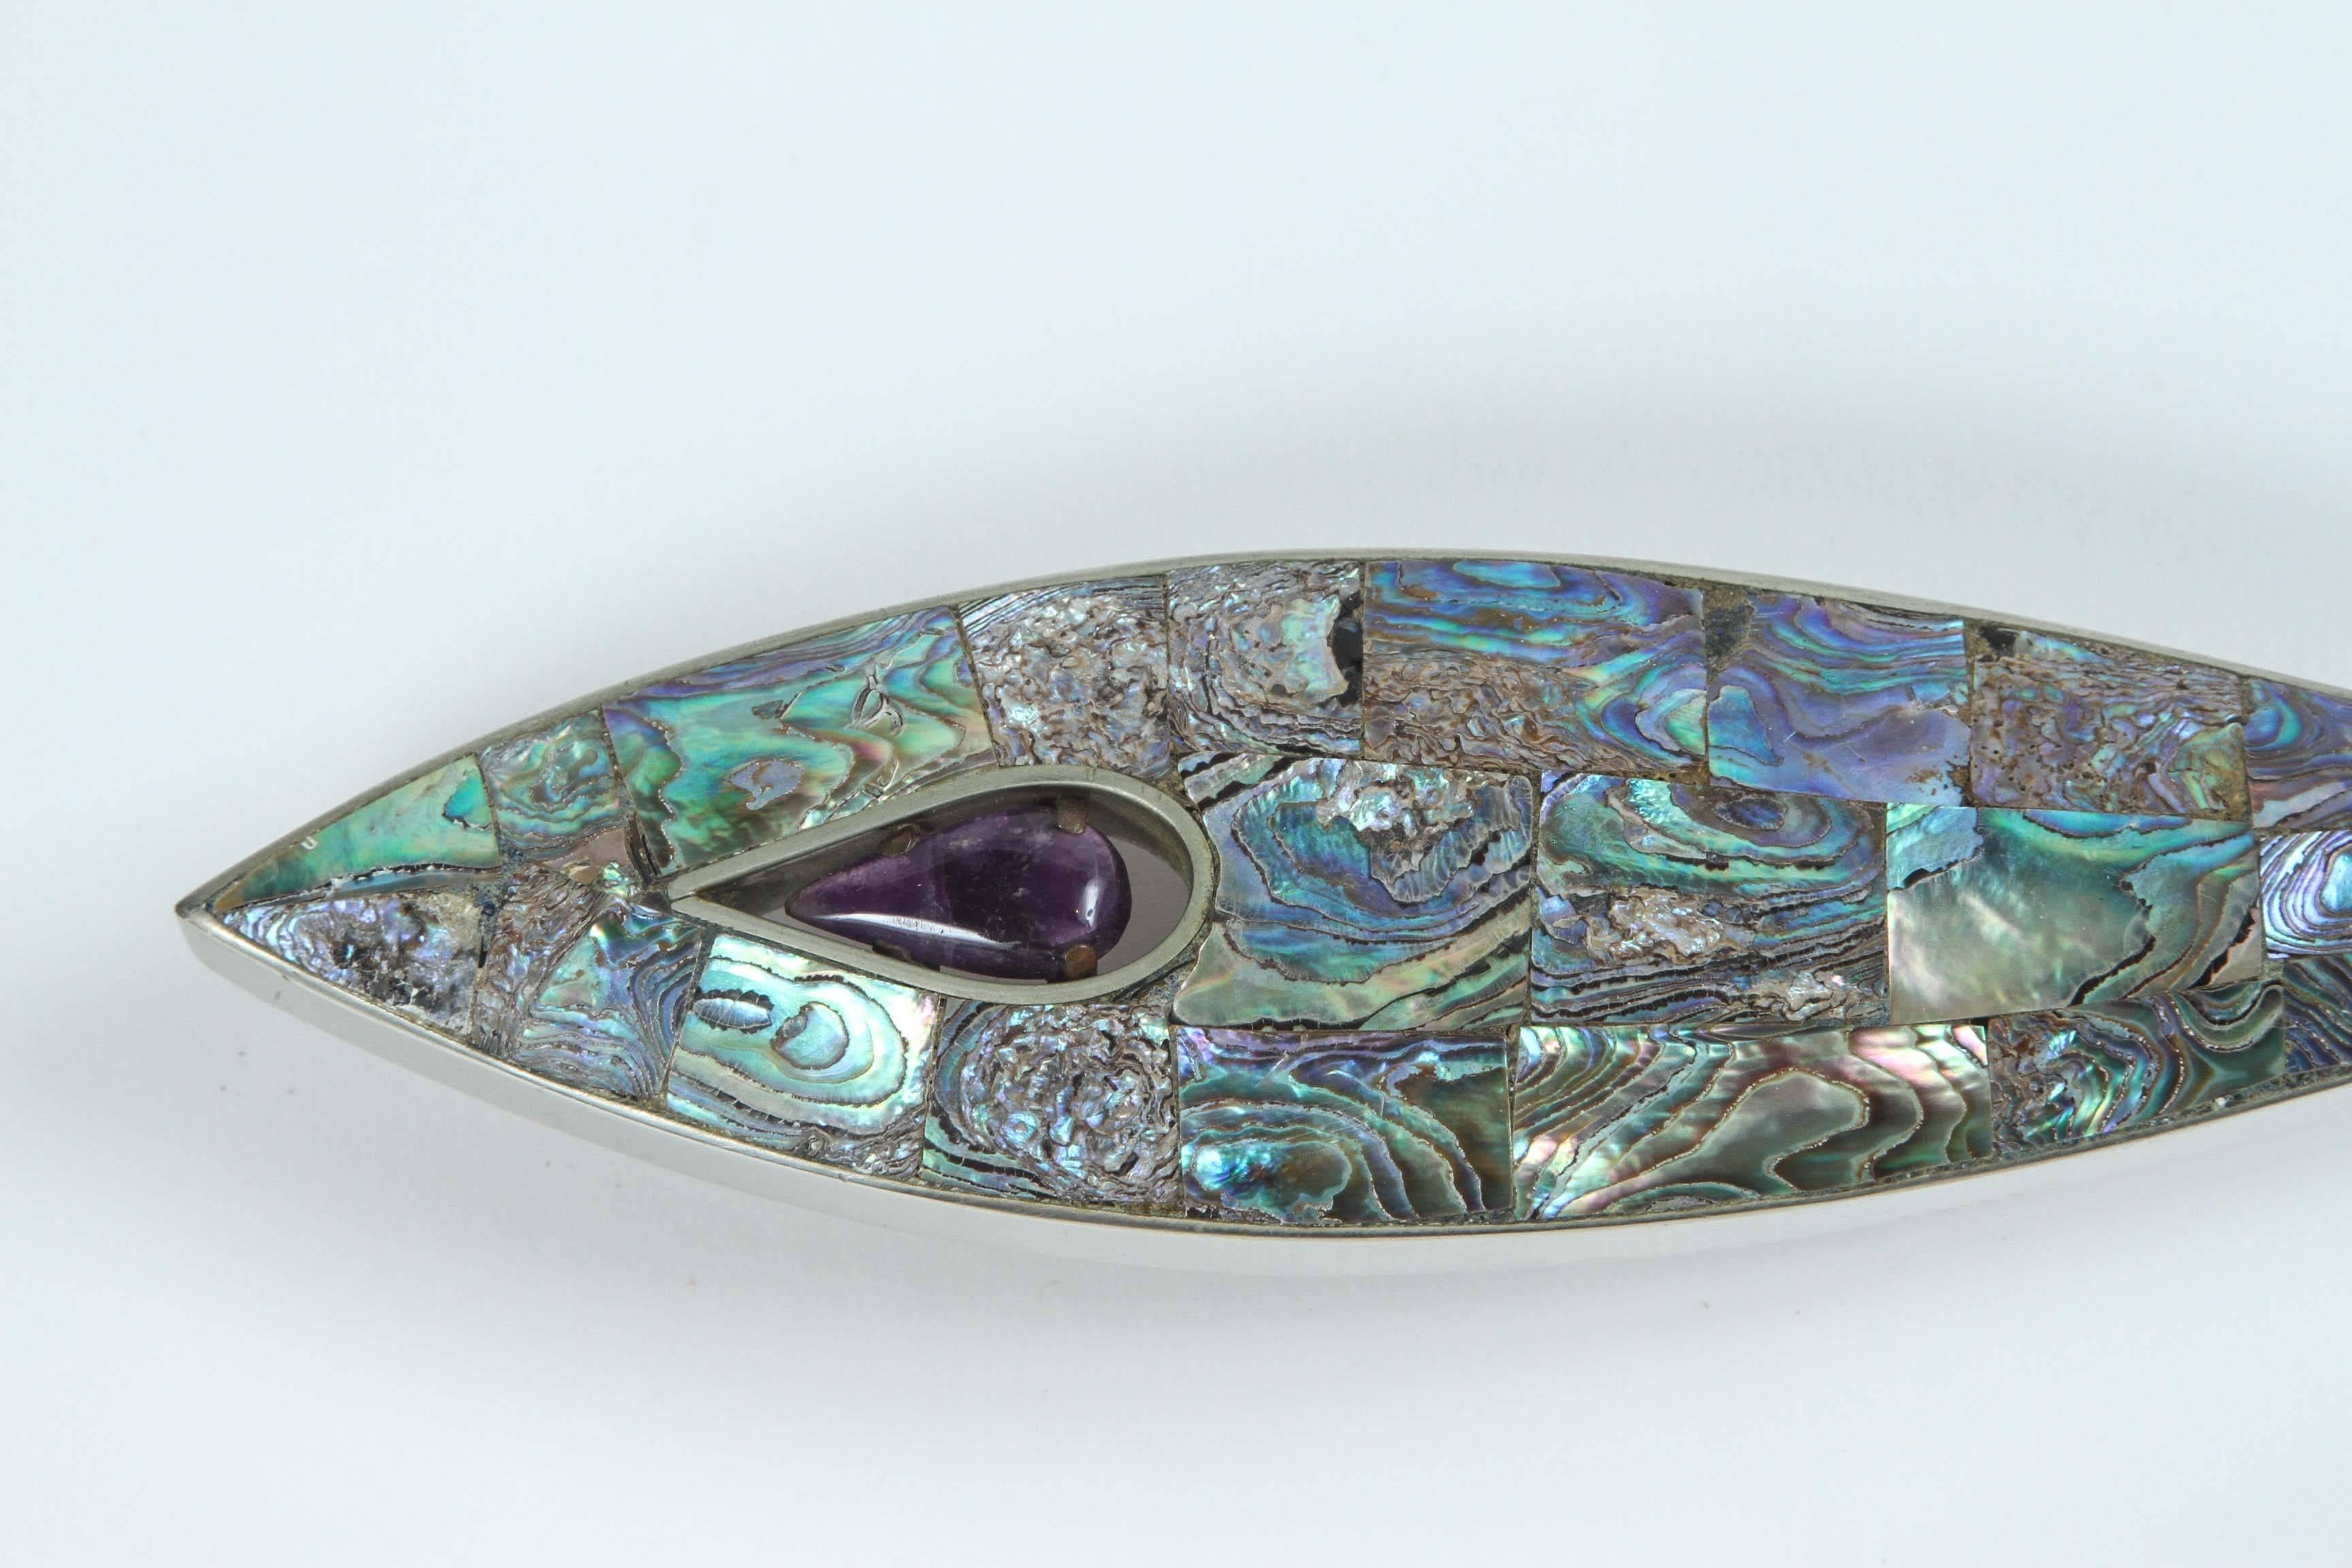 Vintage Modernist fish door pull made of copper, silver overlay, abalone and floating amethyst eye. 

Copper base with brass extensions to hold the handle away from door.

Hallmarked 